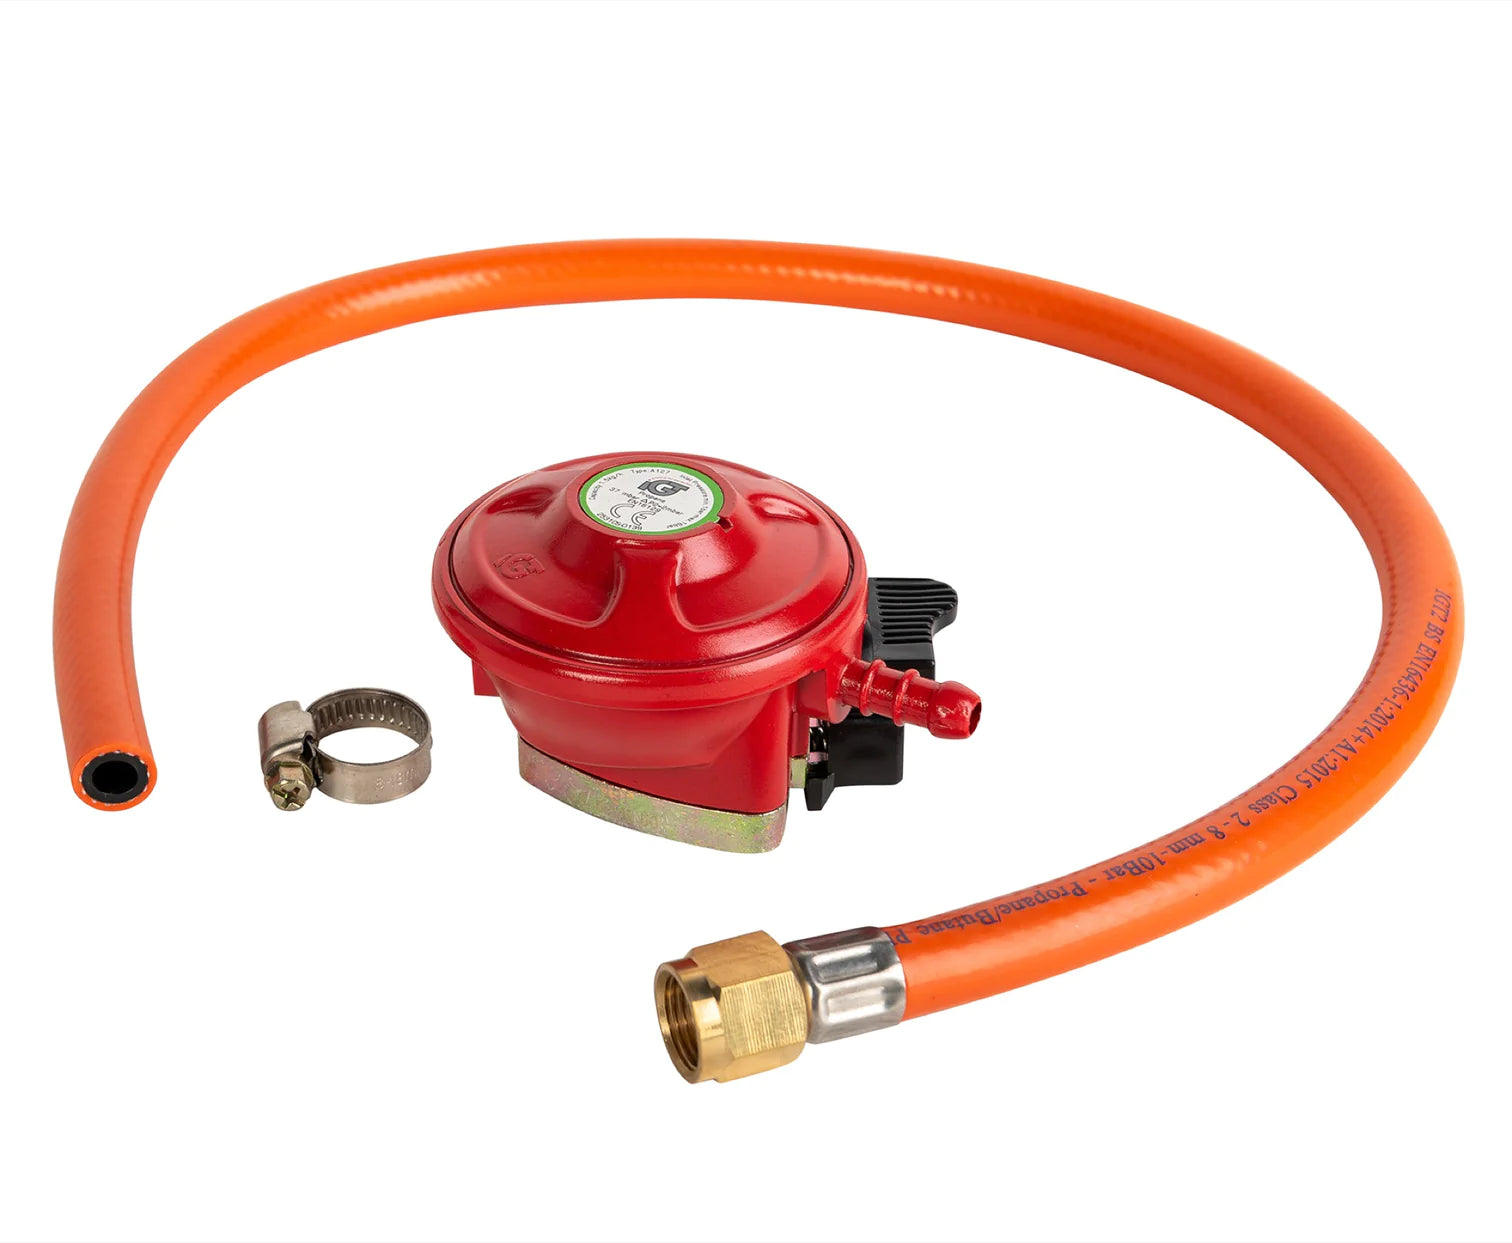 Beefeater UK Hose and Regulator Assembly